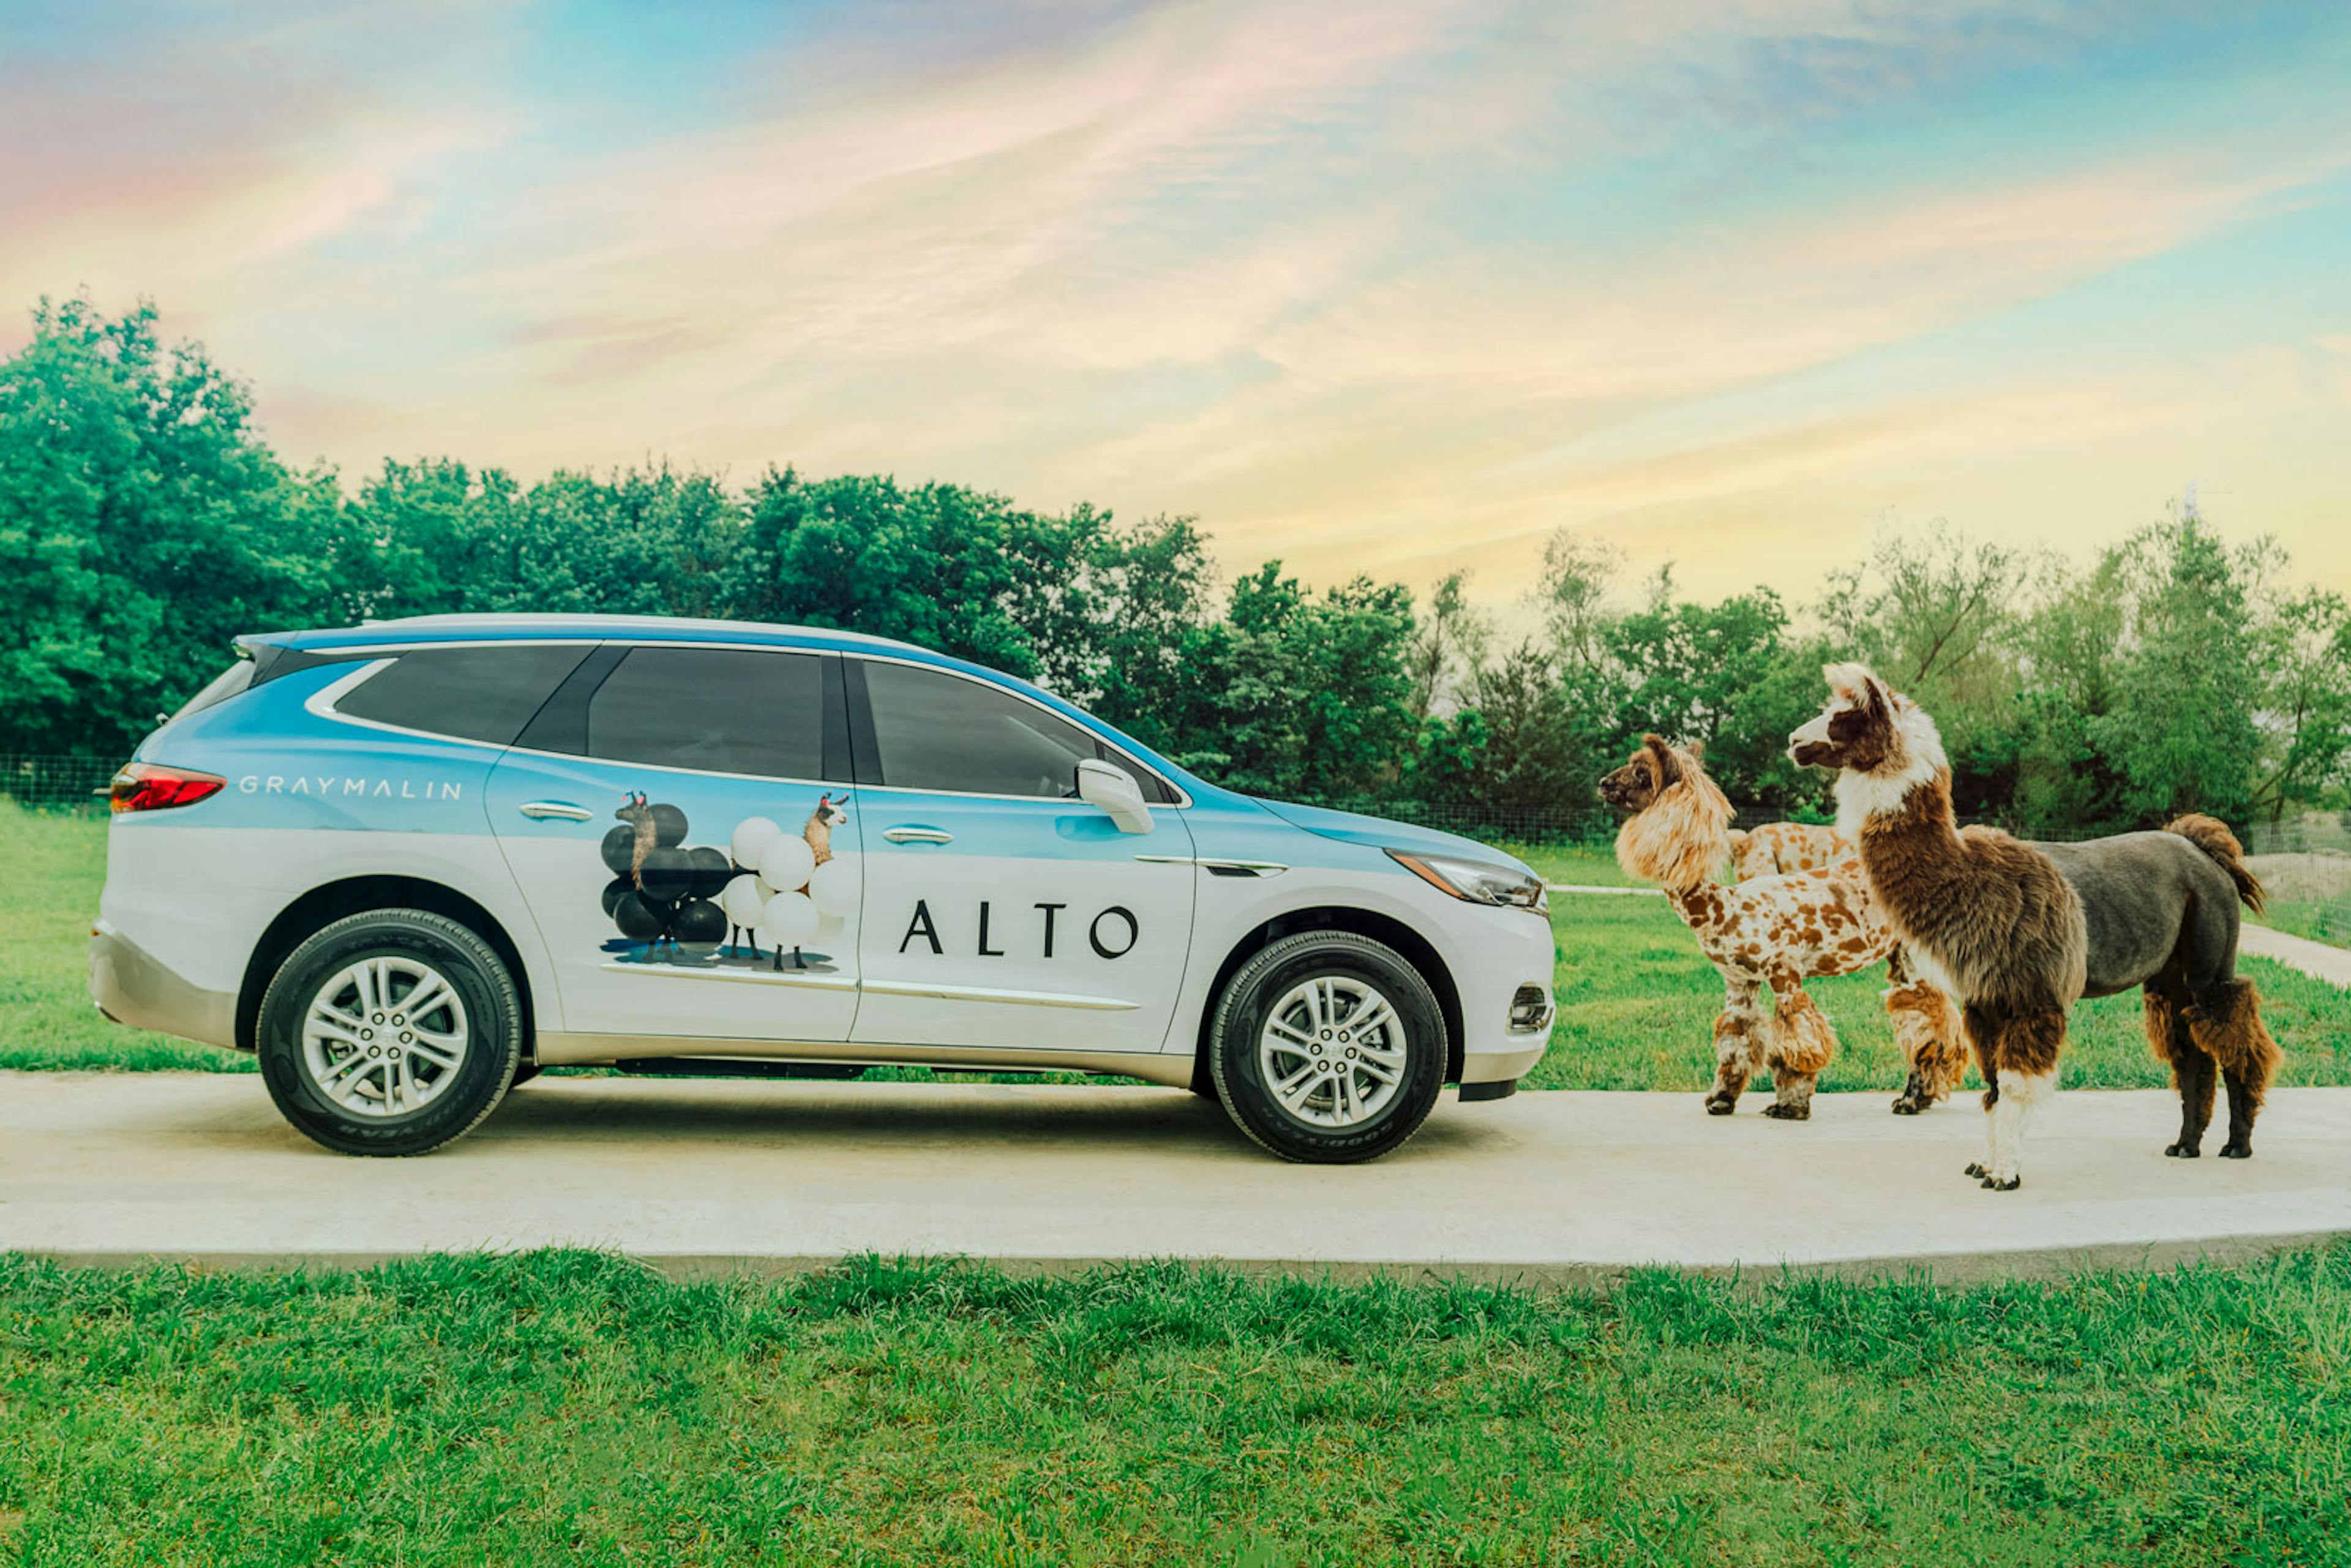 Alto collaborated with Gray Malin on its art cars for the entirety of May, but has since extended its partnership.Alto/Gray Malin